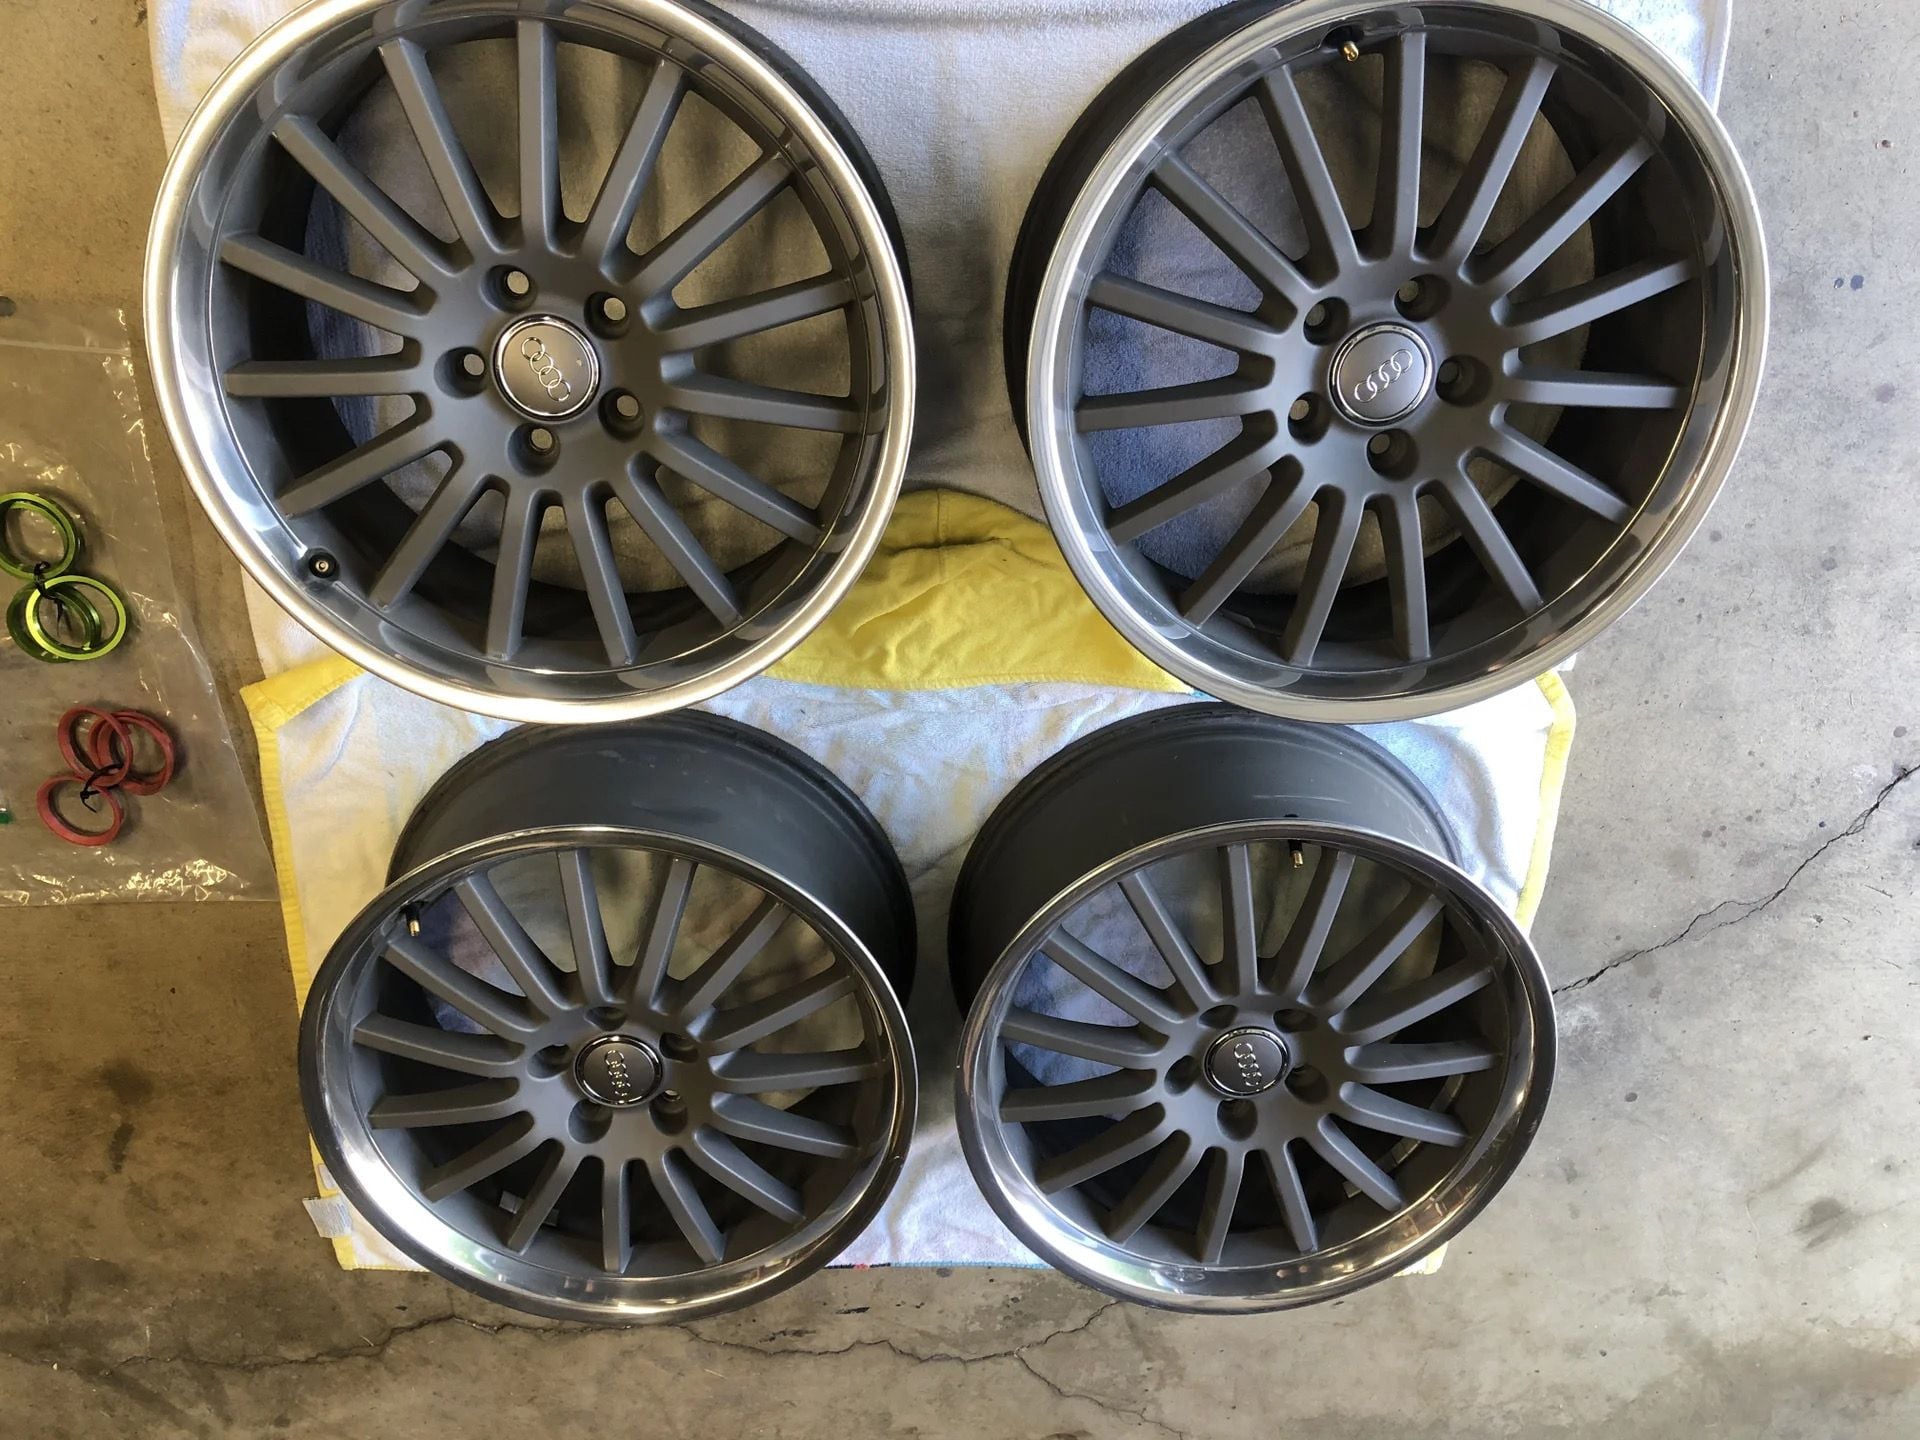 Wheels and Tires/Axles - Genuine Audi Candelas OEM Wheels 18x8 ET47 - Used - 2009 to 2025 Audi A4 - 0  All Models - Beaverton, OR 97008, United States